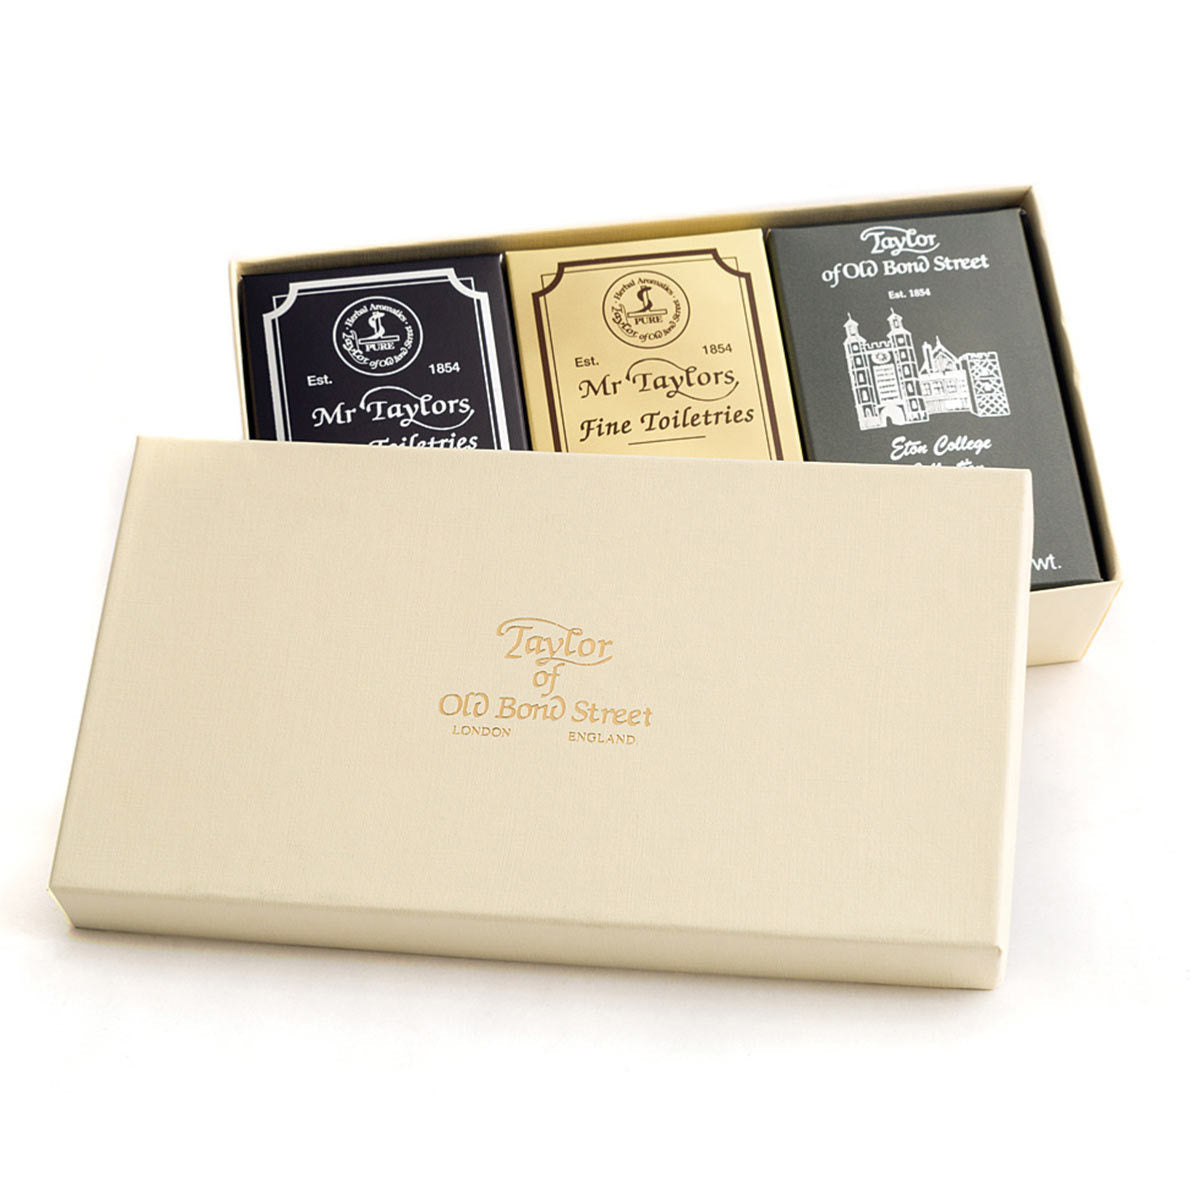 Primary image of Mixed Bath Soap Gift Set